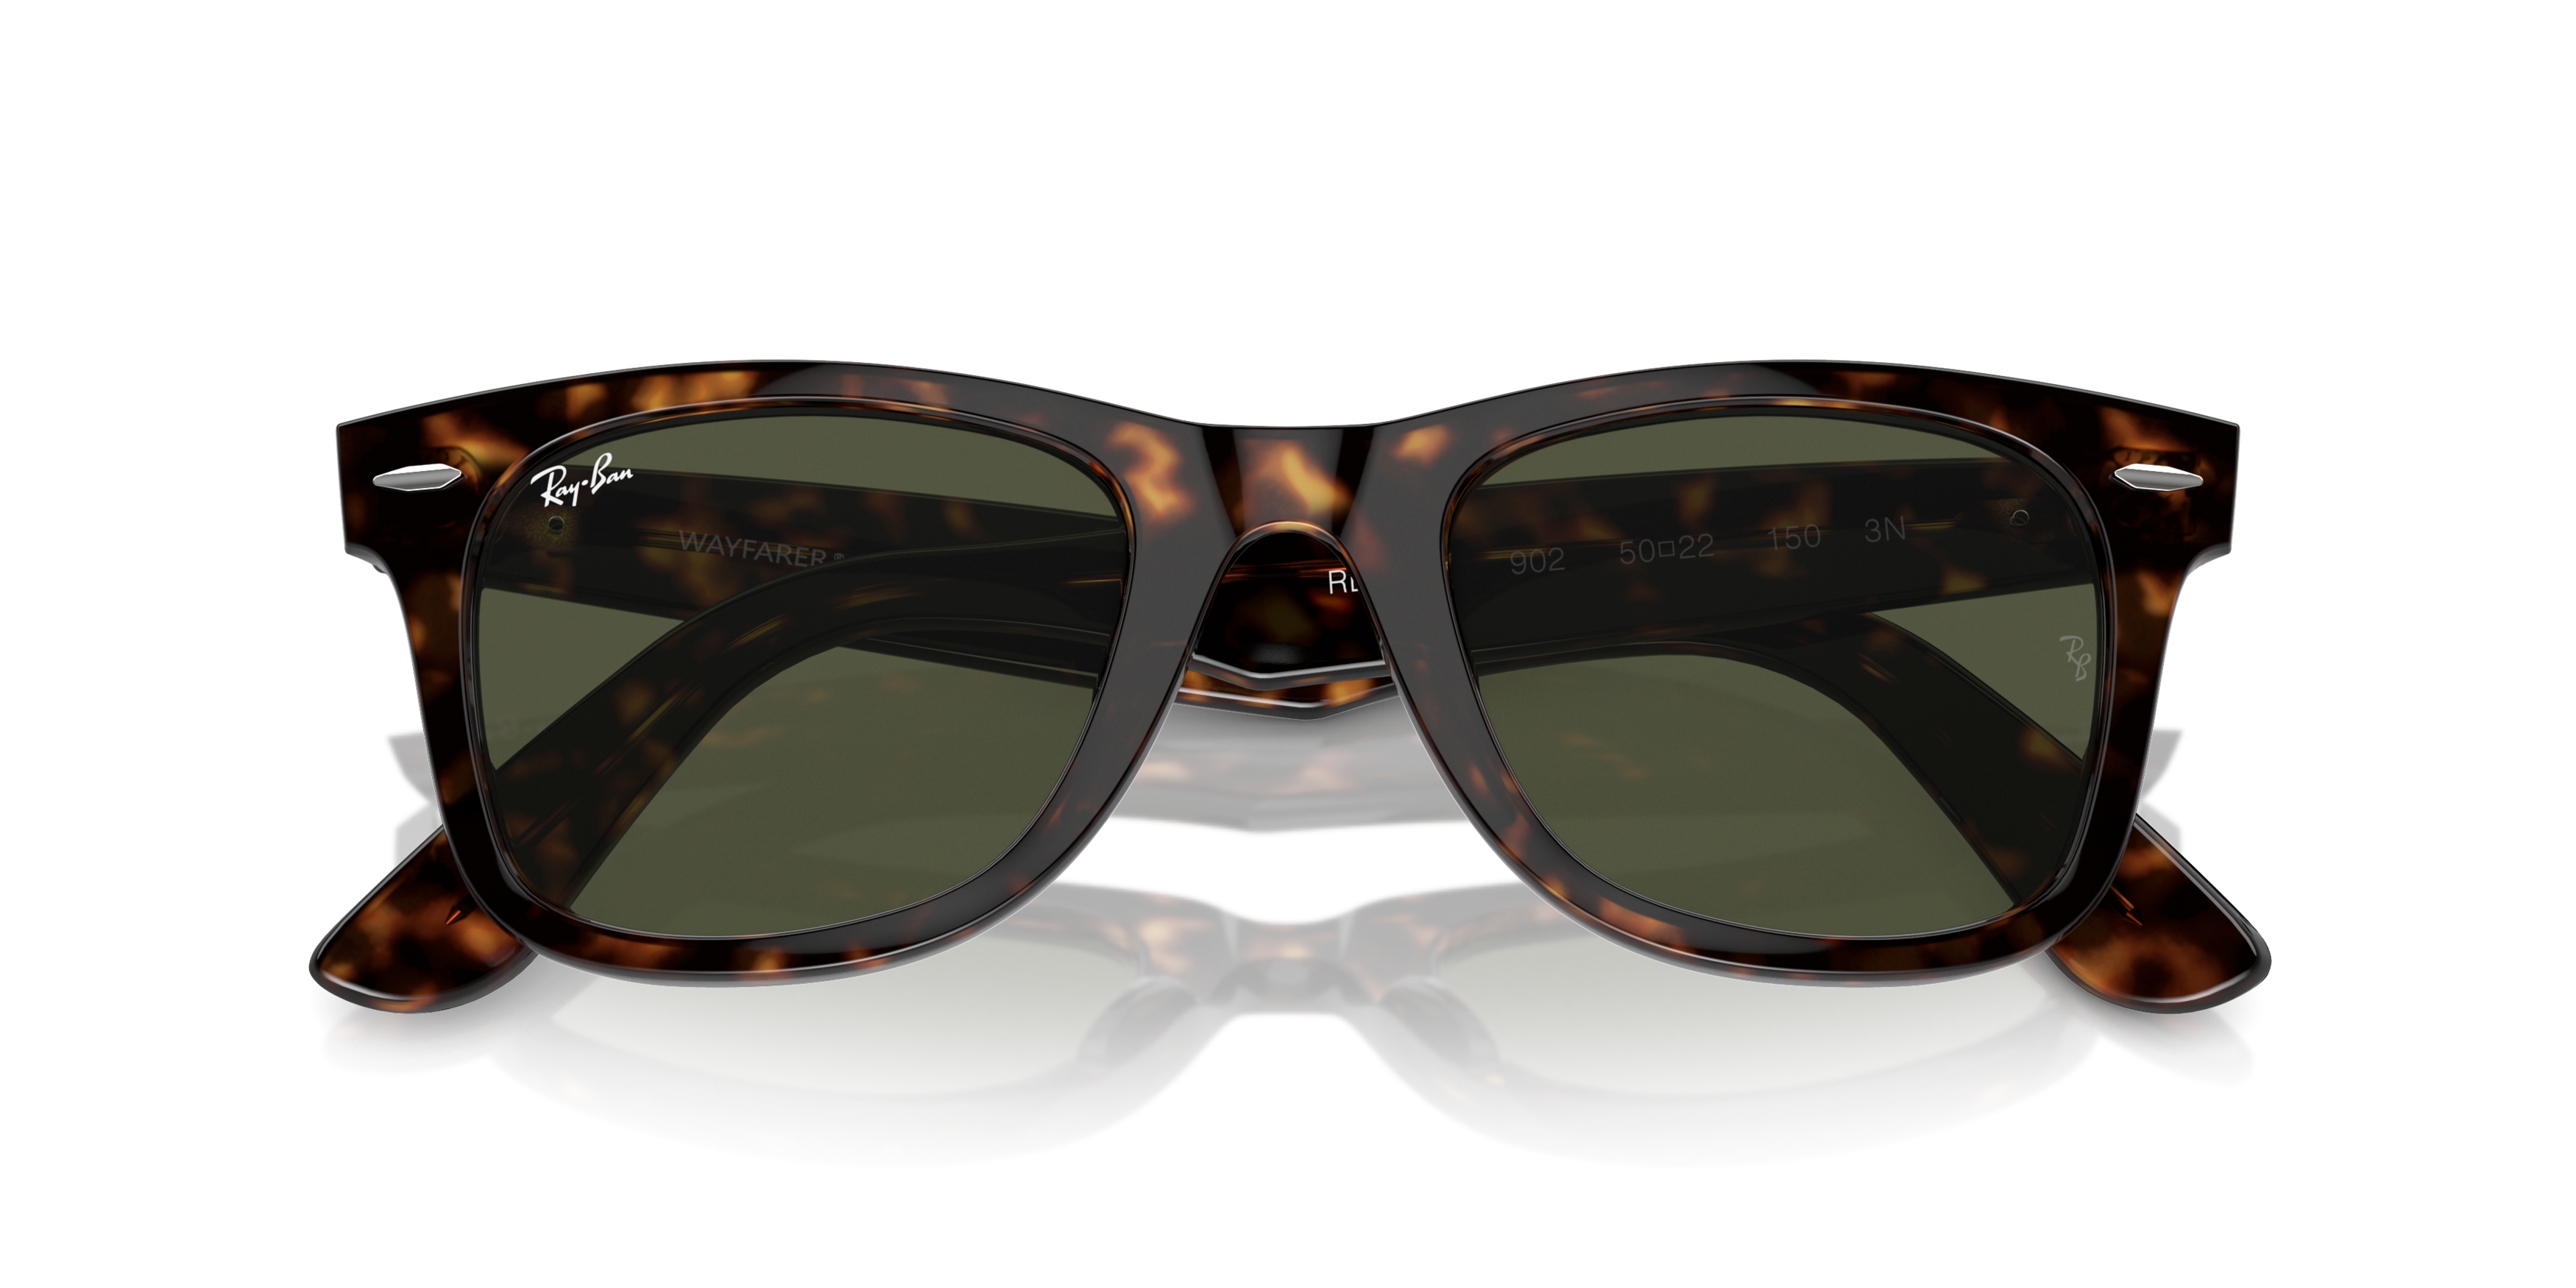 [products.image.folded] RAY-BAN RB2140 902